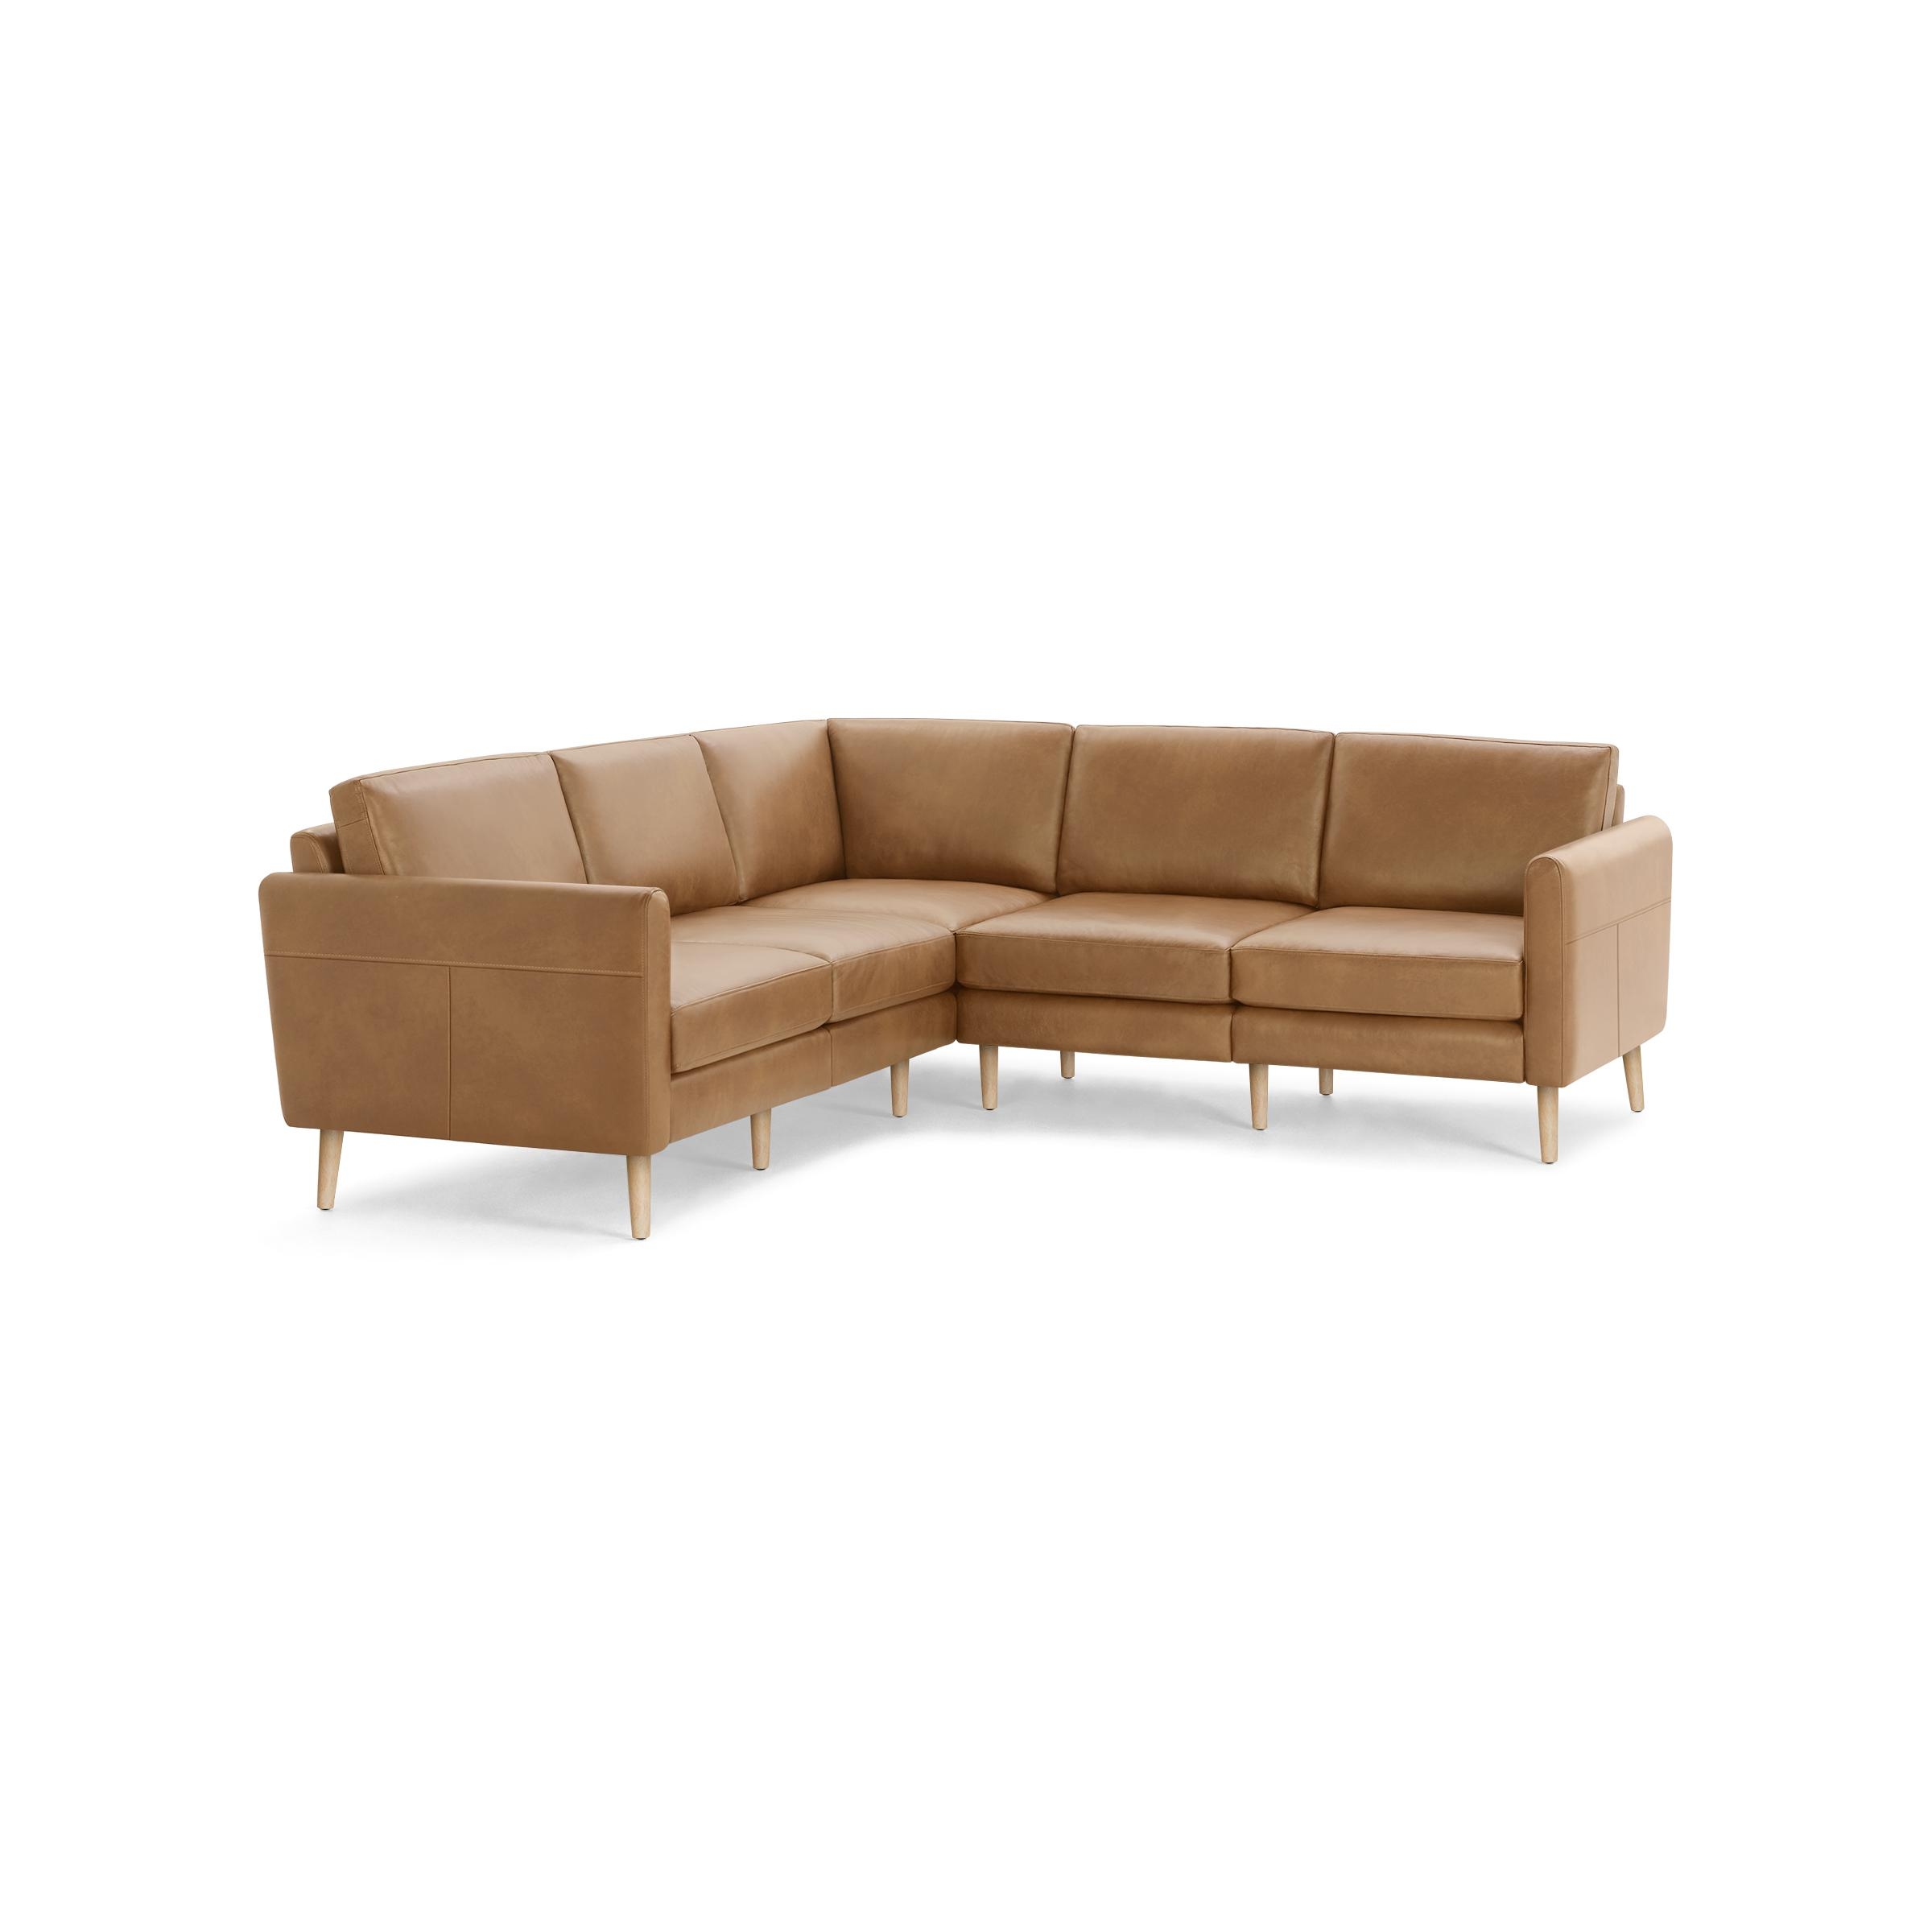 The Arch Nomad Leather 5-Seat Corner Sectional in Camel, Oak Legs - Image 1